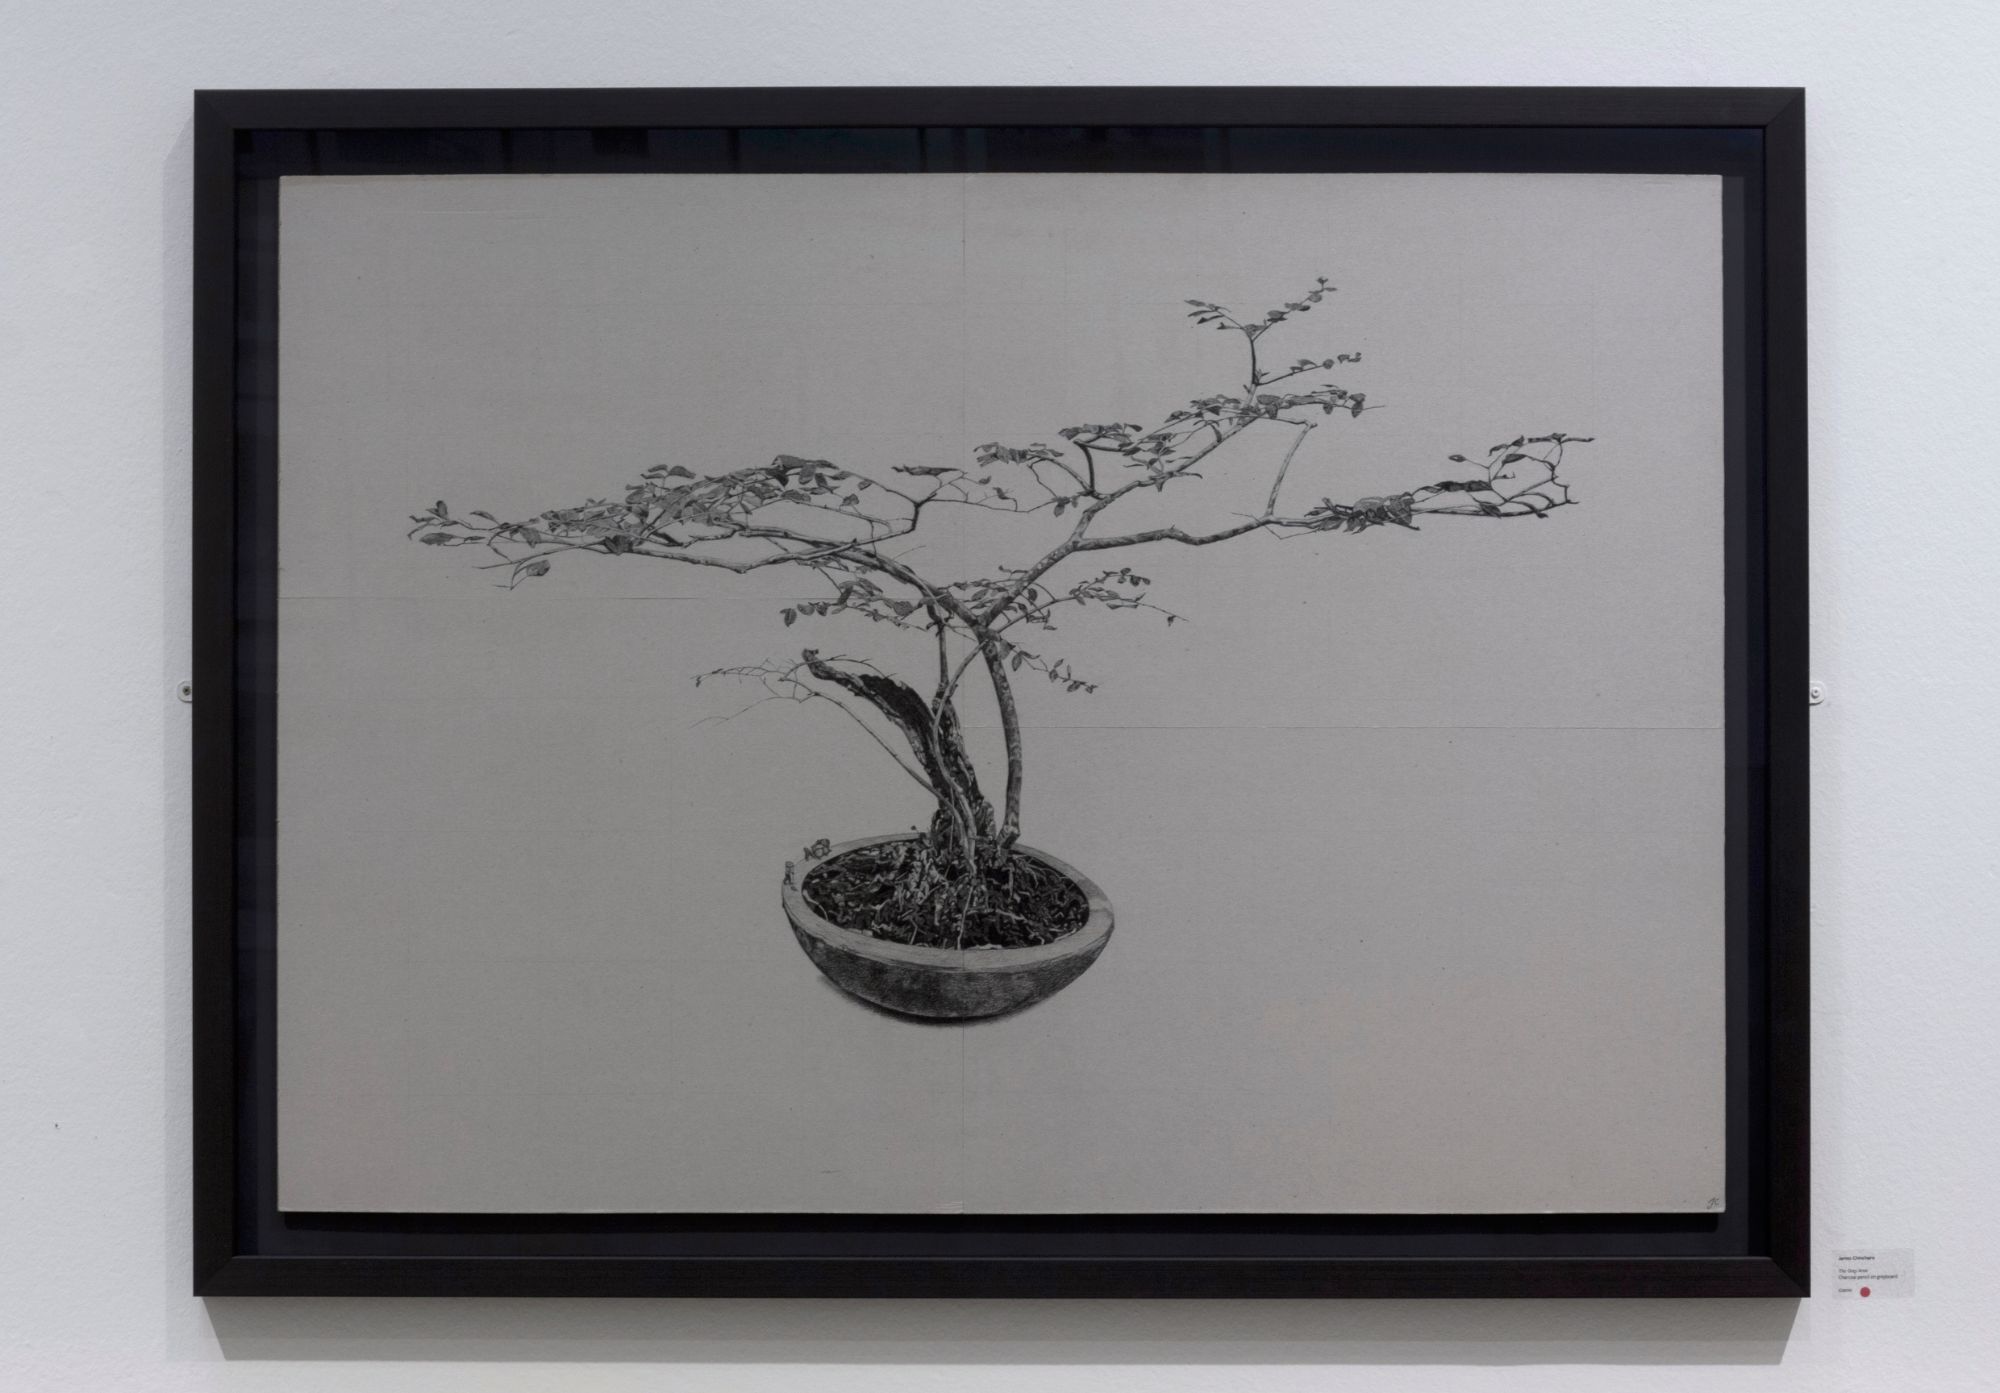 Large drawing of bonsai tree in charcoal